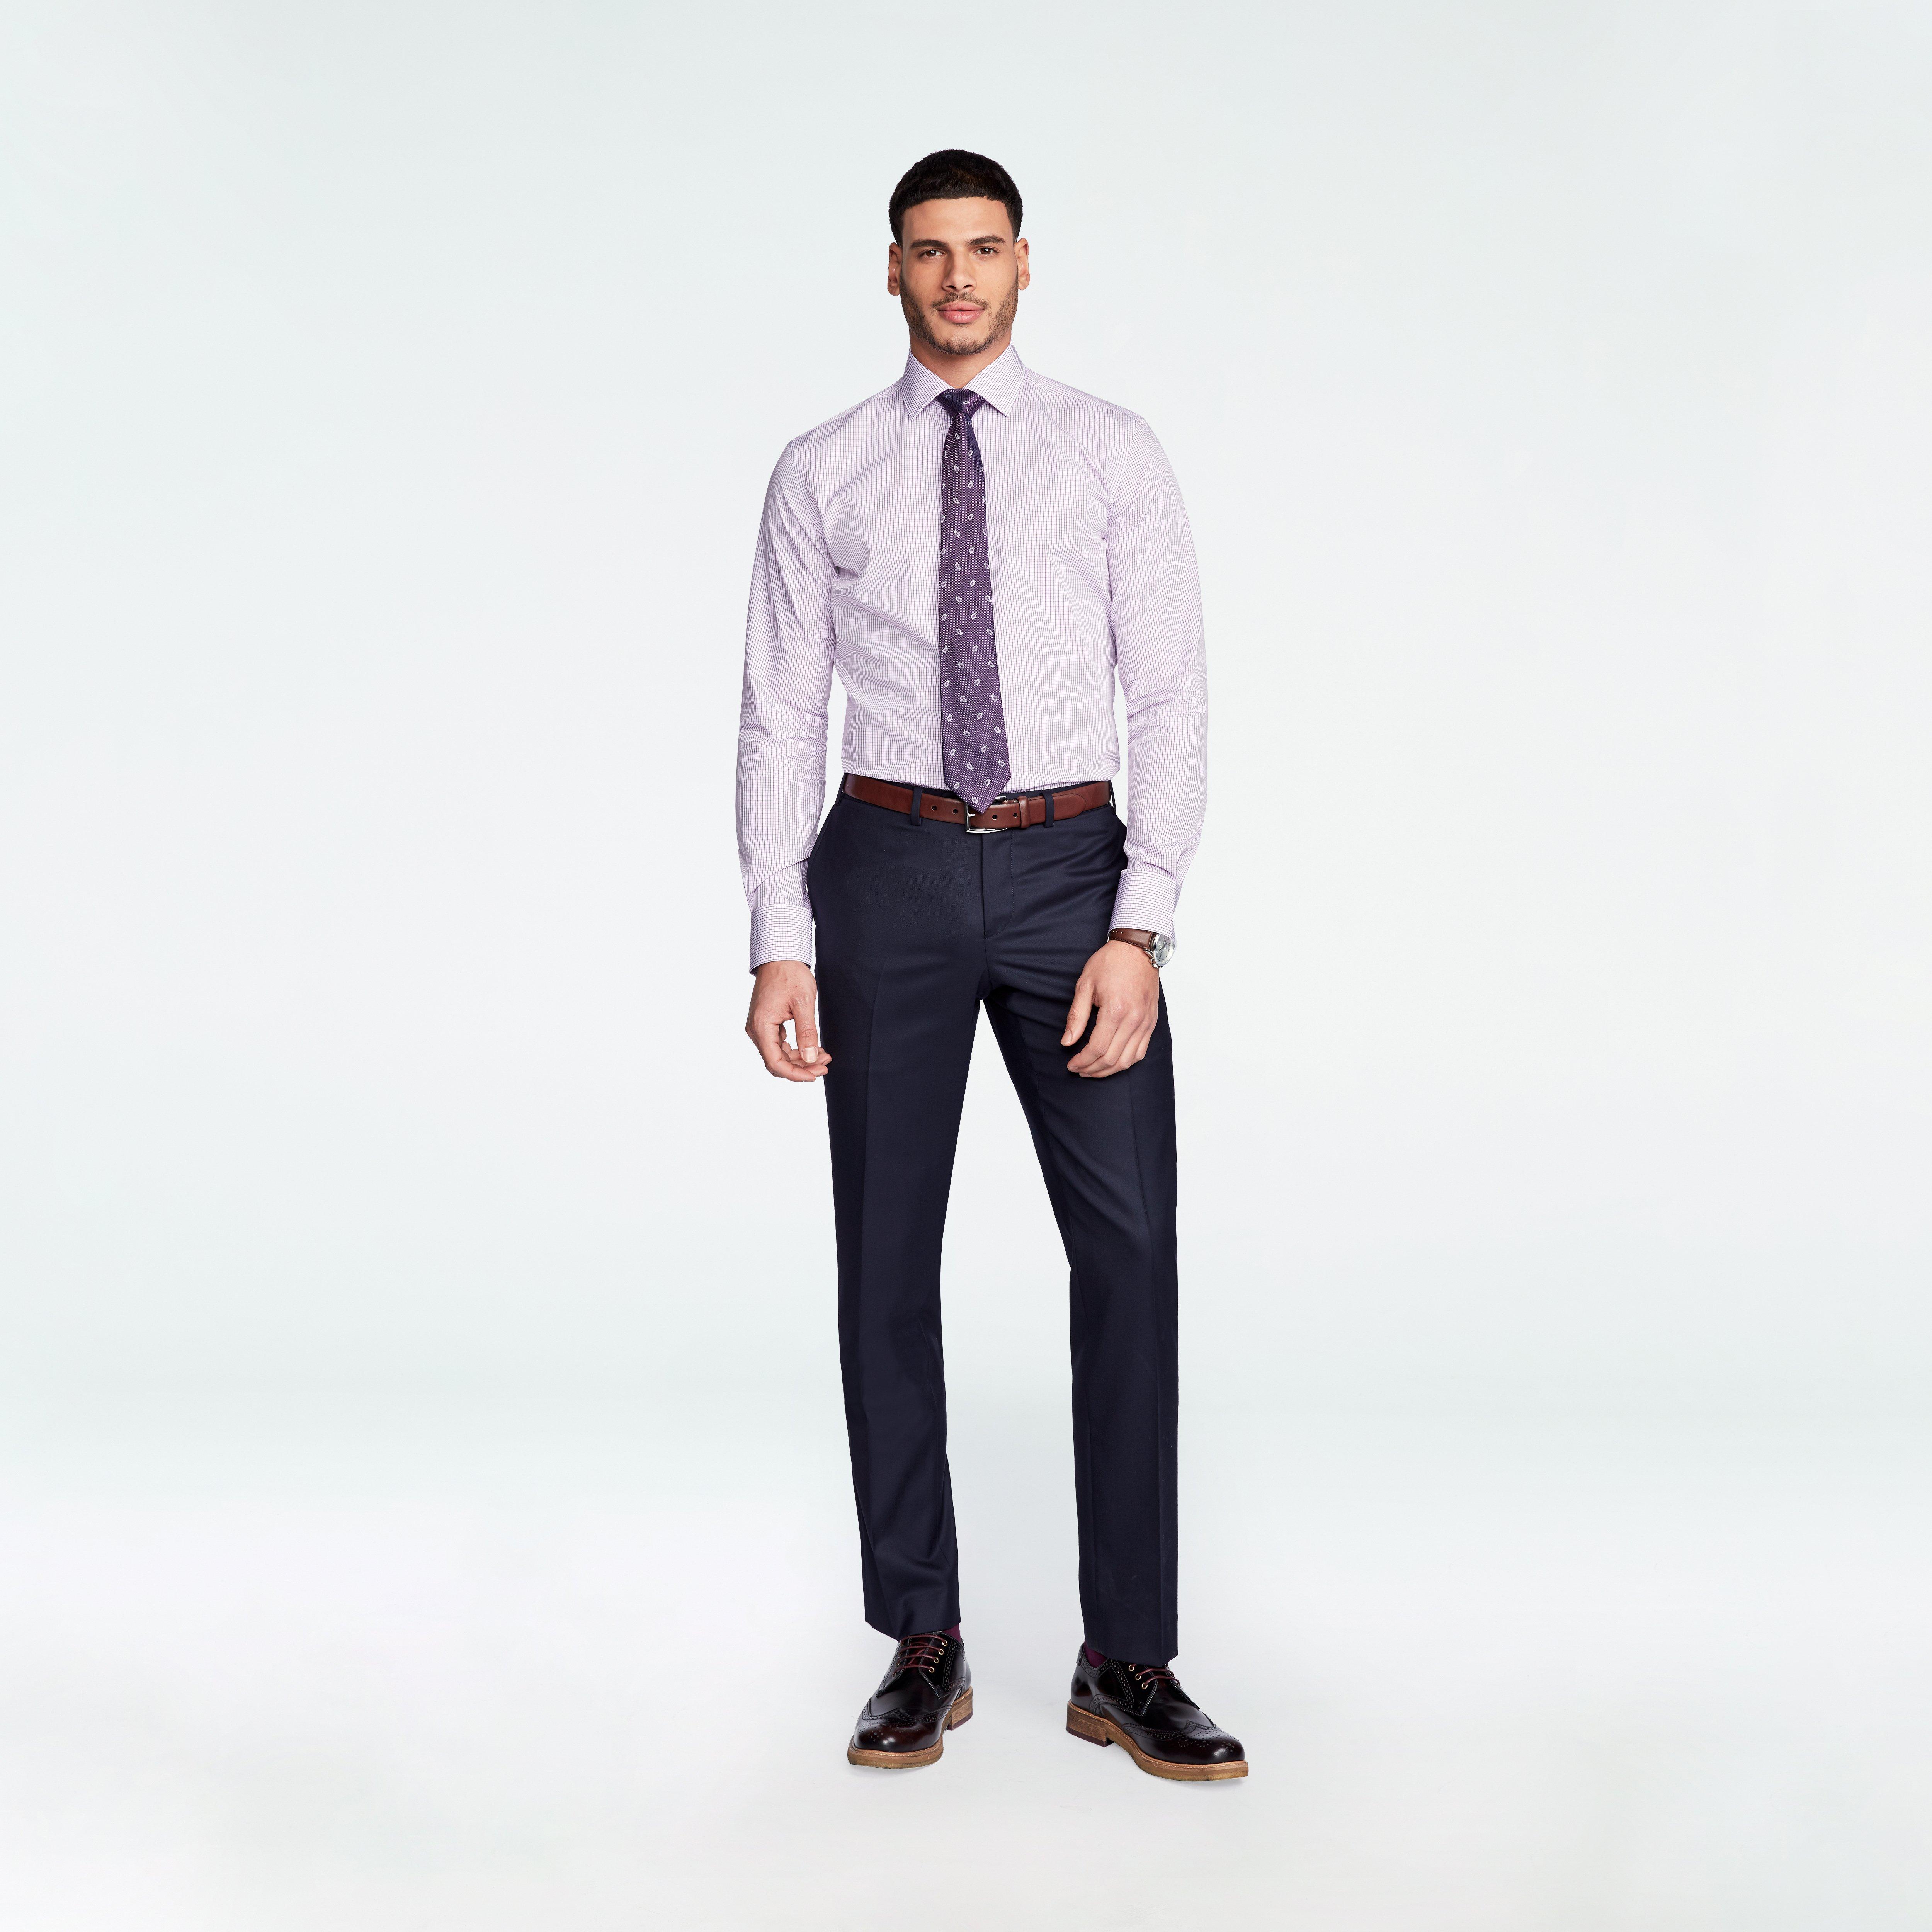 Custom Suits Made For You - Harrogate Midnight Blue Suit | INDOCHINO